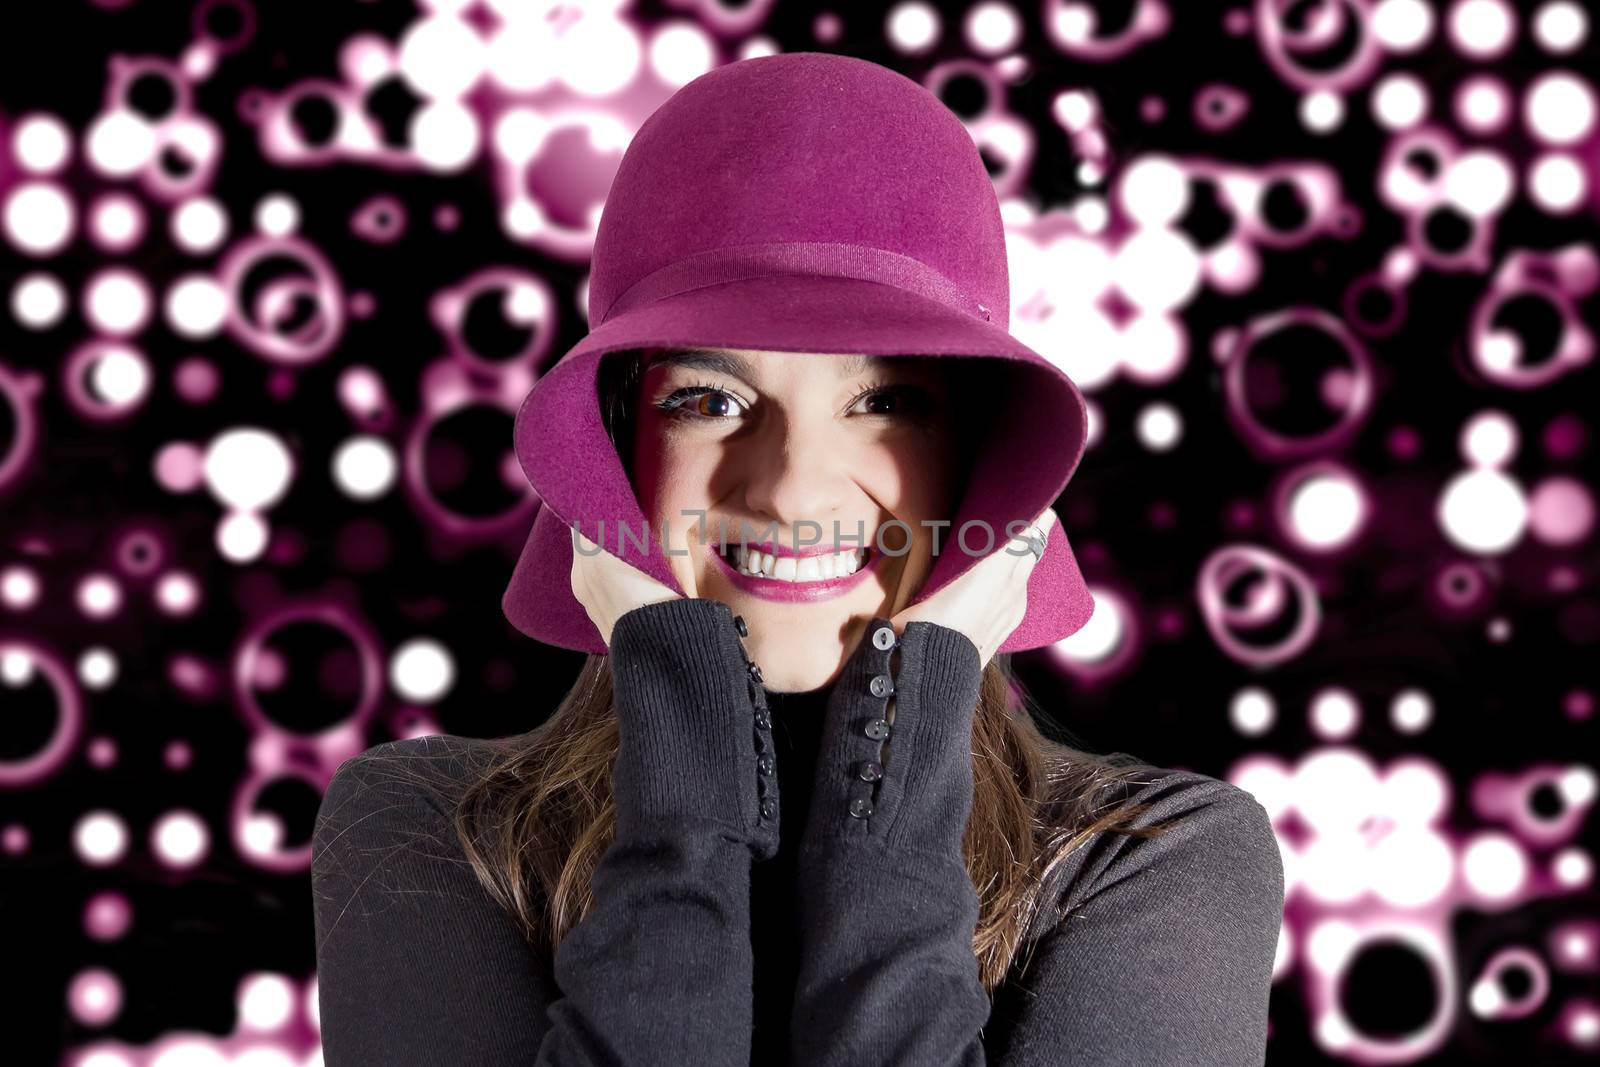 Portrait of beautiful young girl with a garnet hat on her head, in front of spotlights background